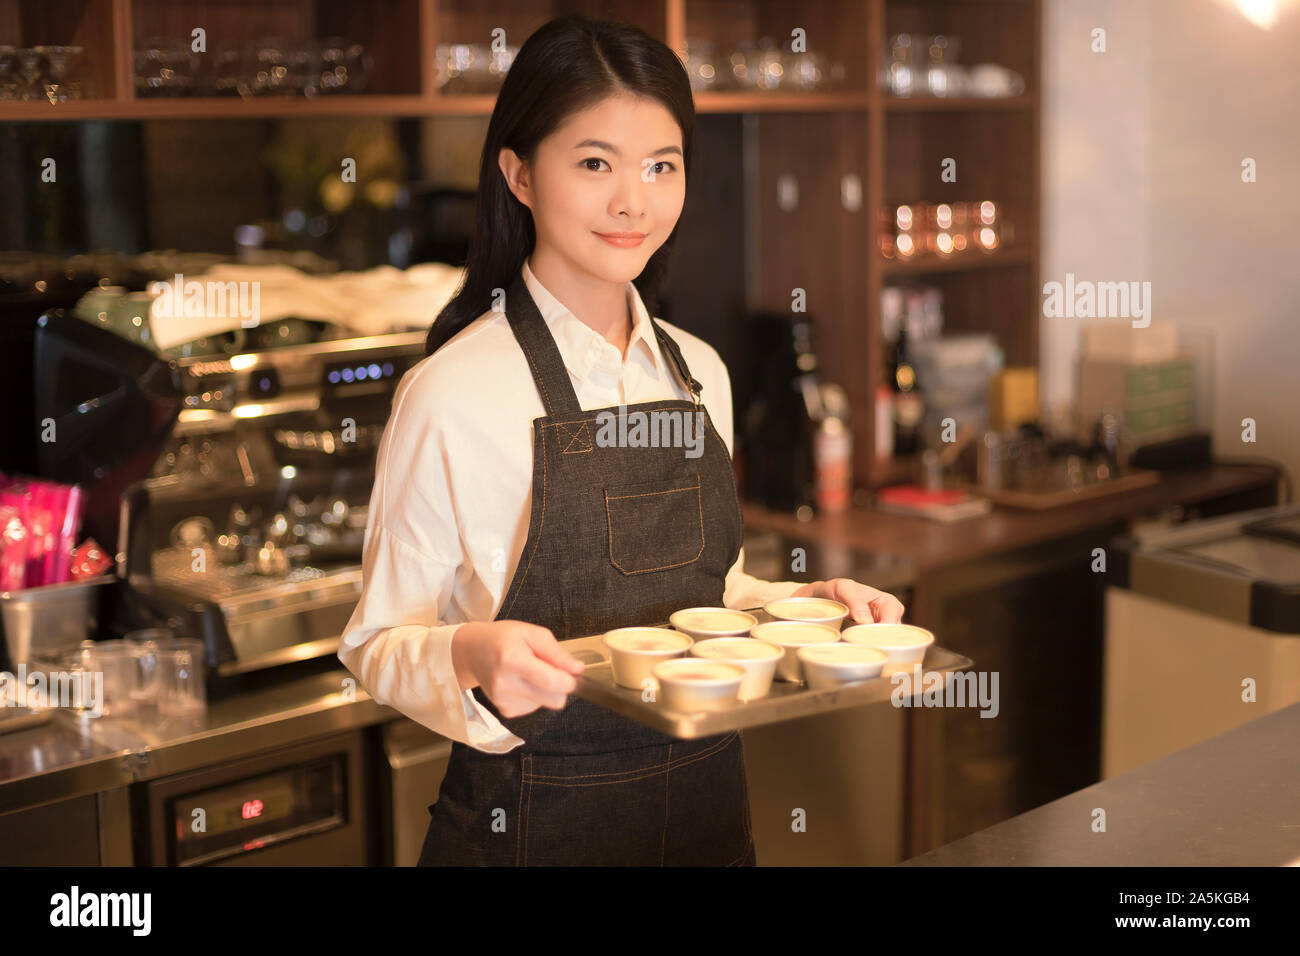 Barmaid standing behind bar counter and holding tray Stock Photo